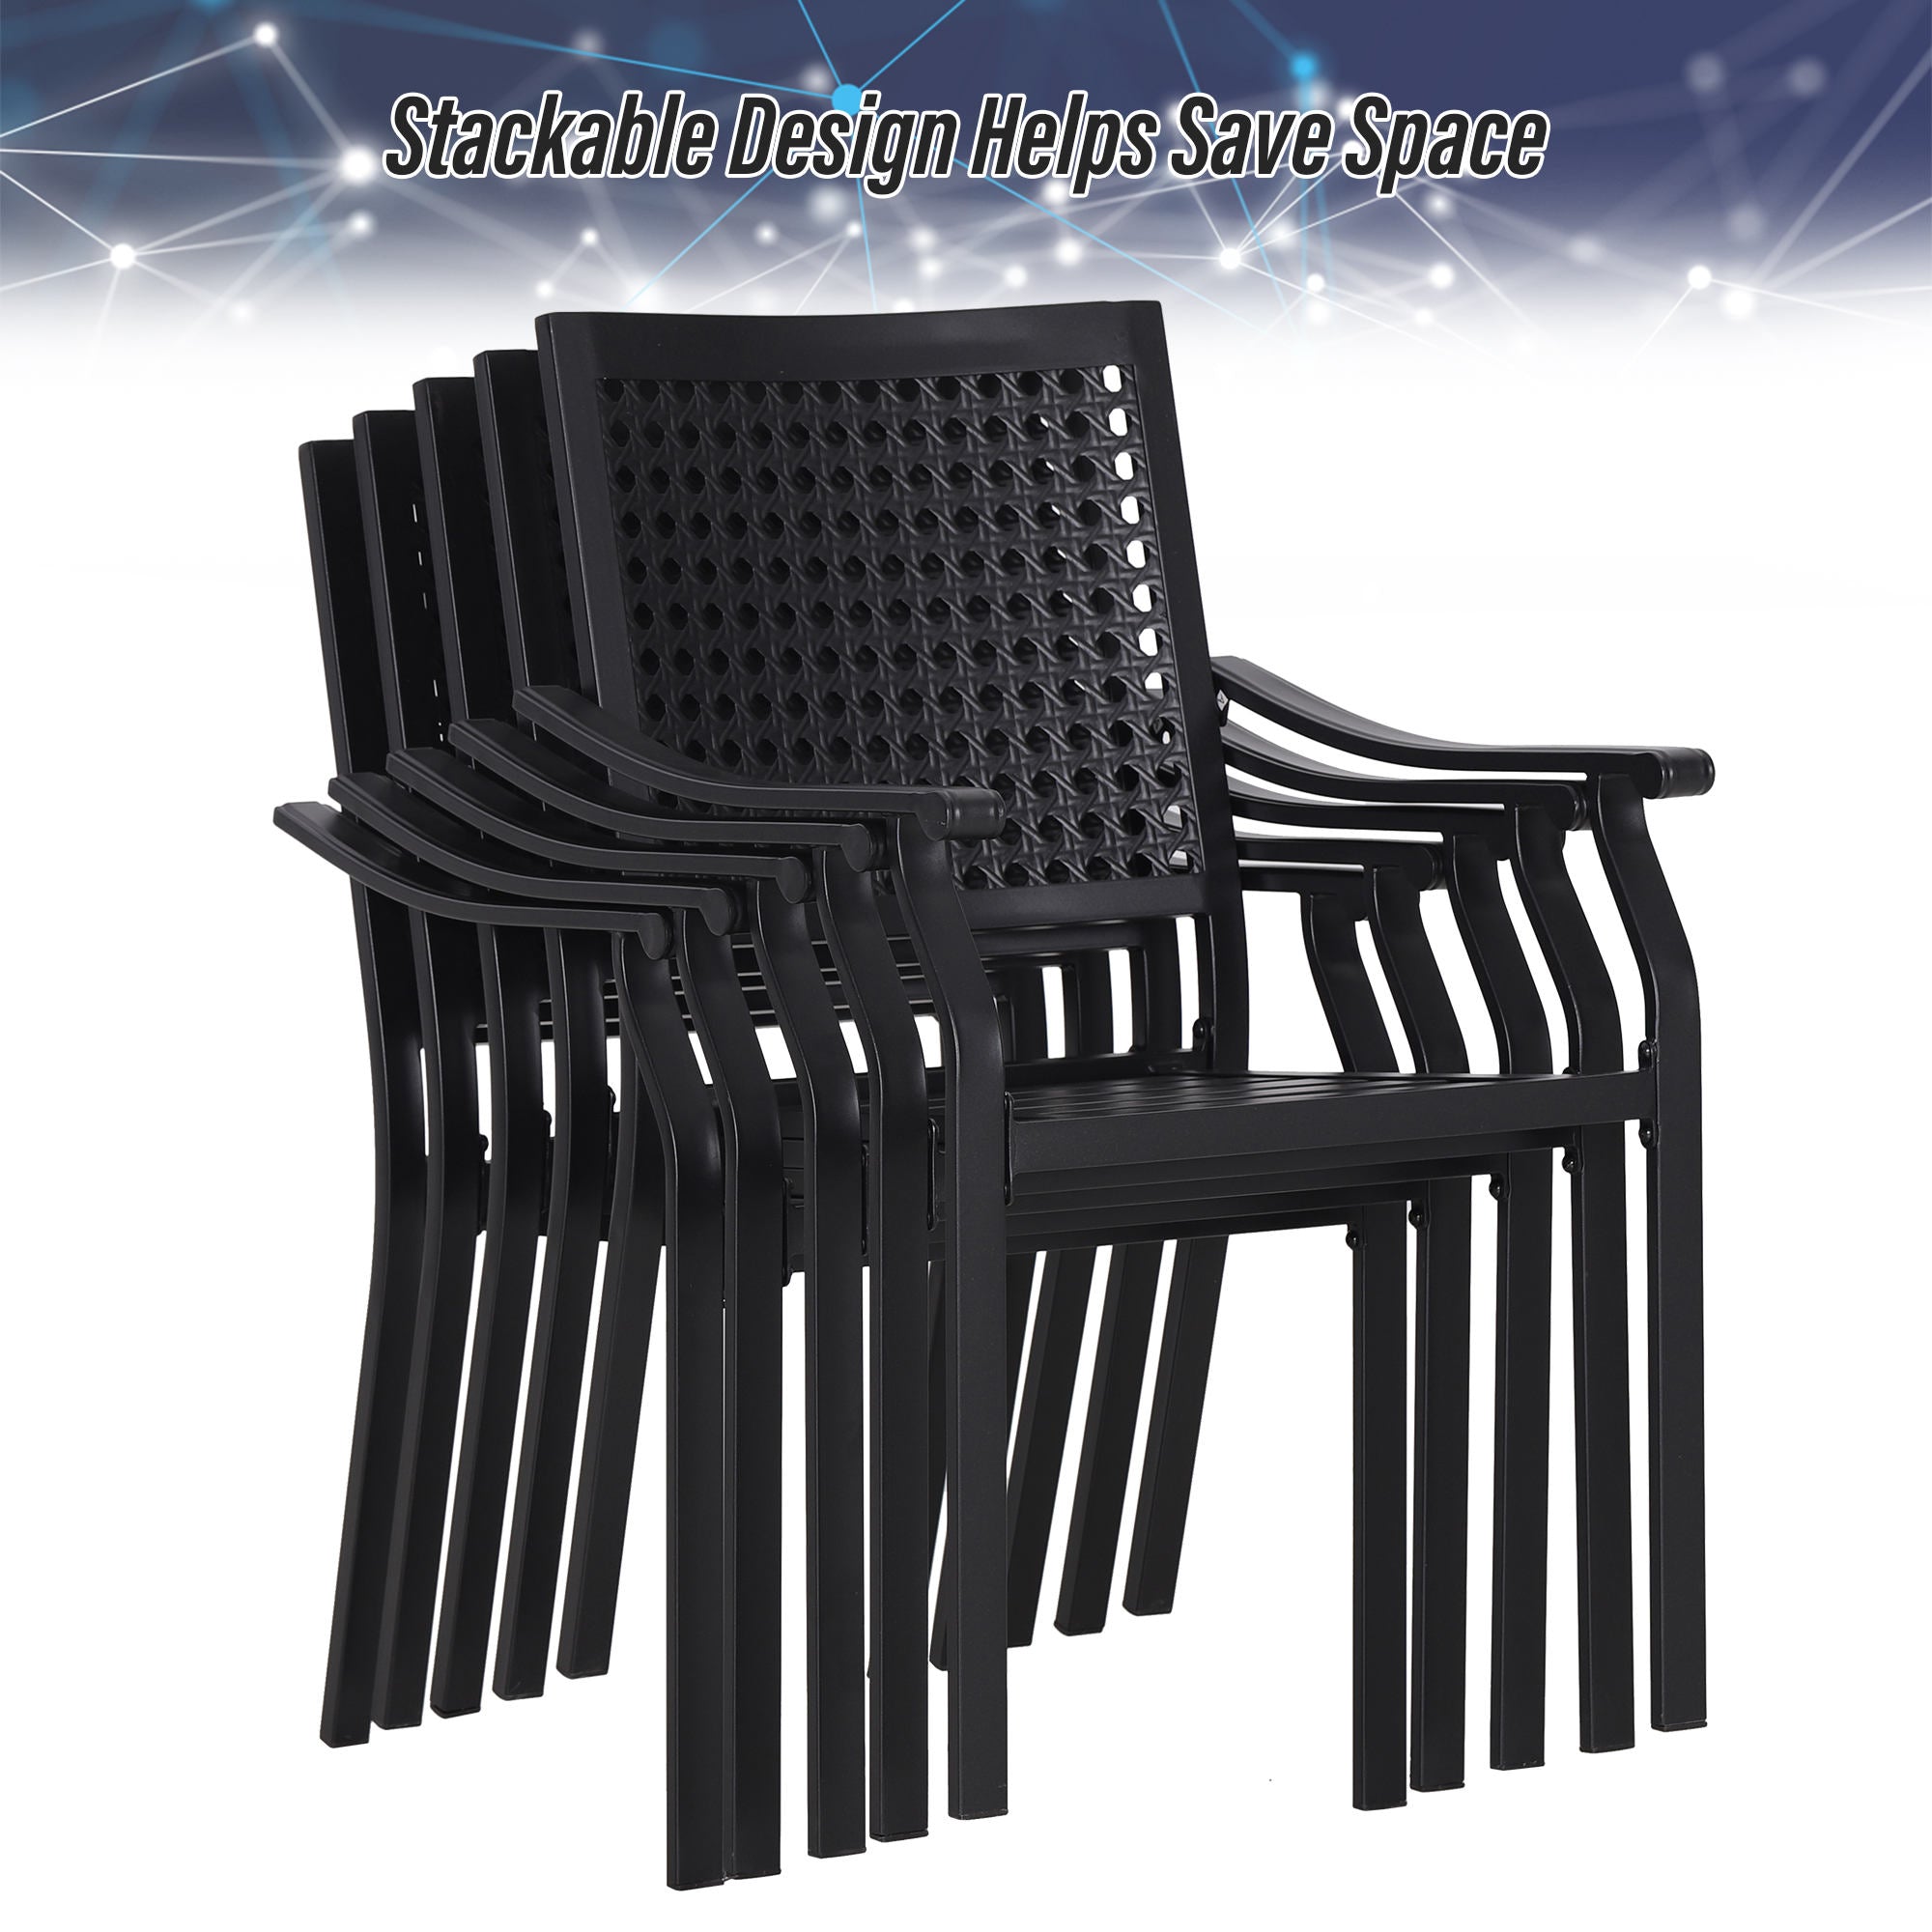 MFSTUDIO 7-Piece Patio Dining Sets Embossed Table & Bulleyes Pattern Steel Fixed Chairs